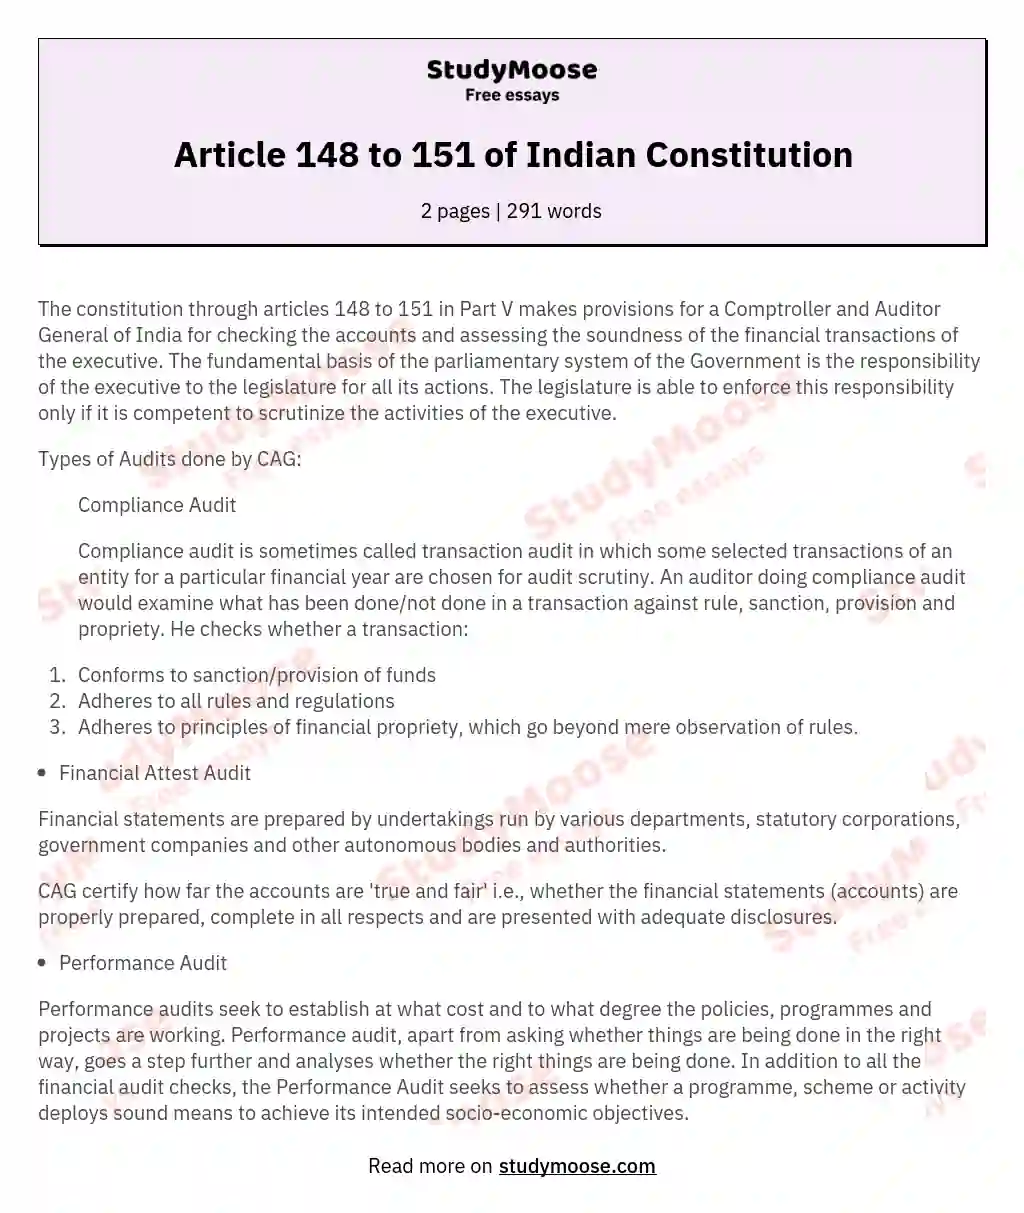 Article 148 to 151 of Indian Constitution essay